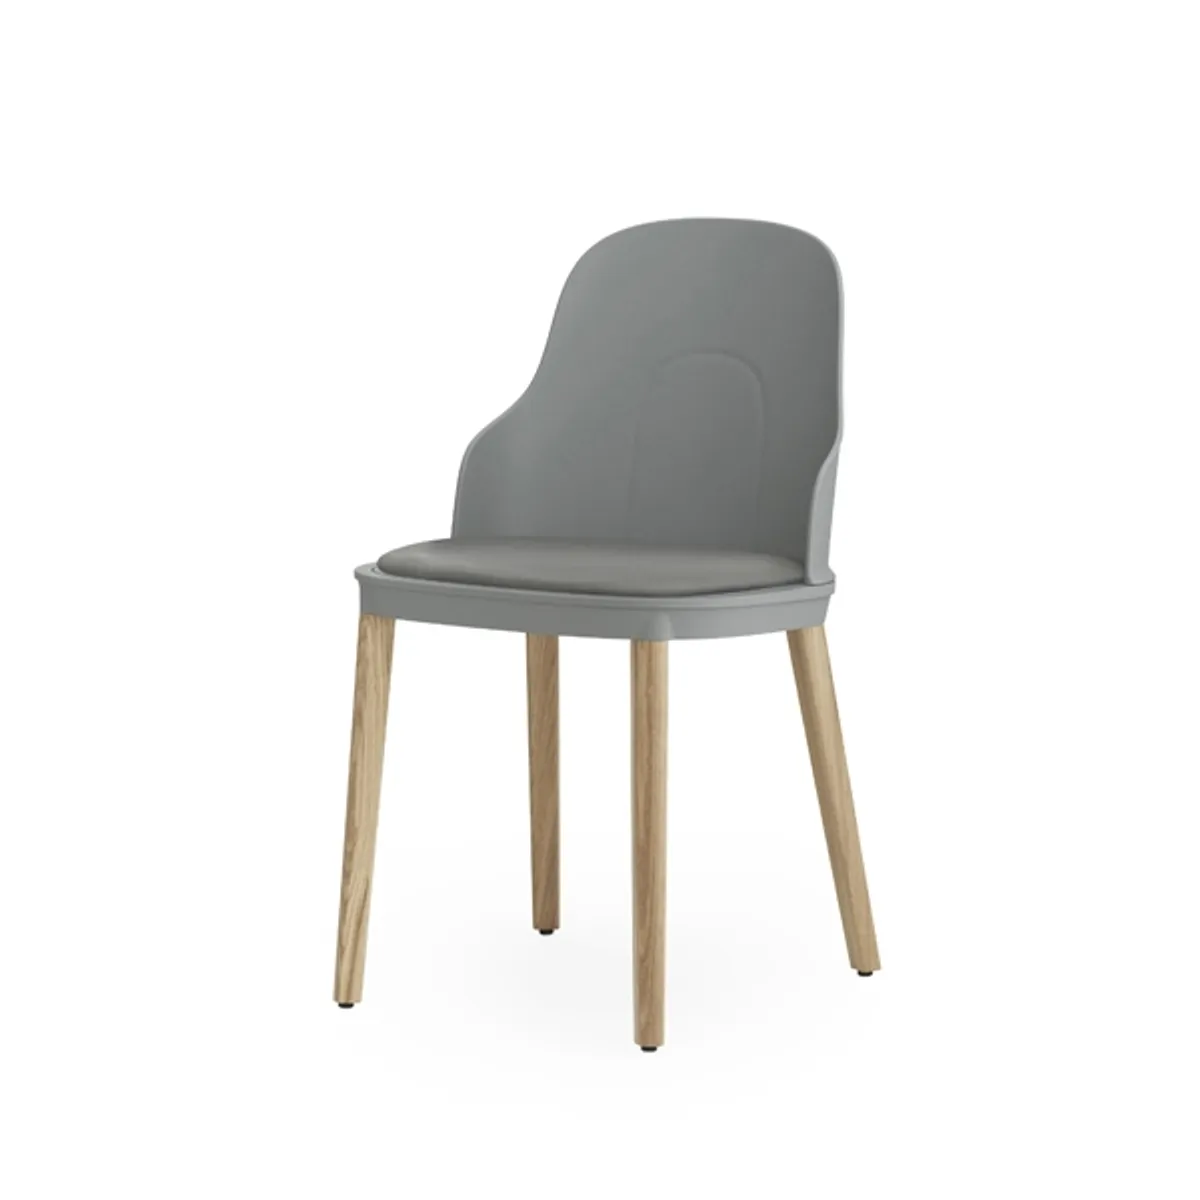 Bon soft wood chair Inside Out Contracts3